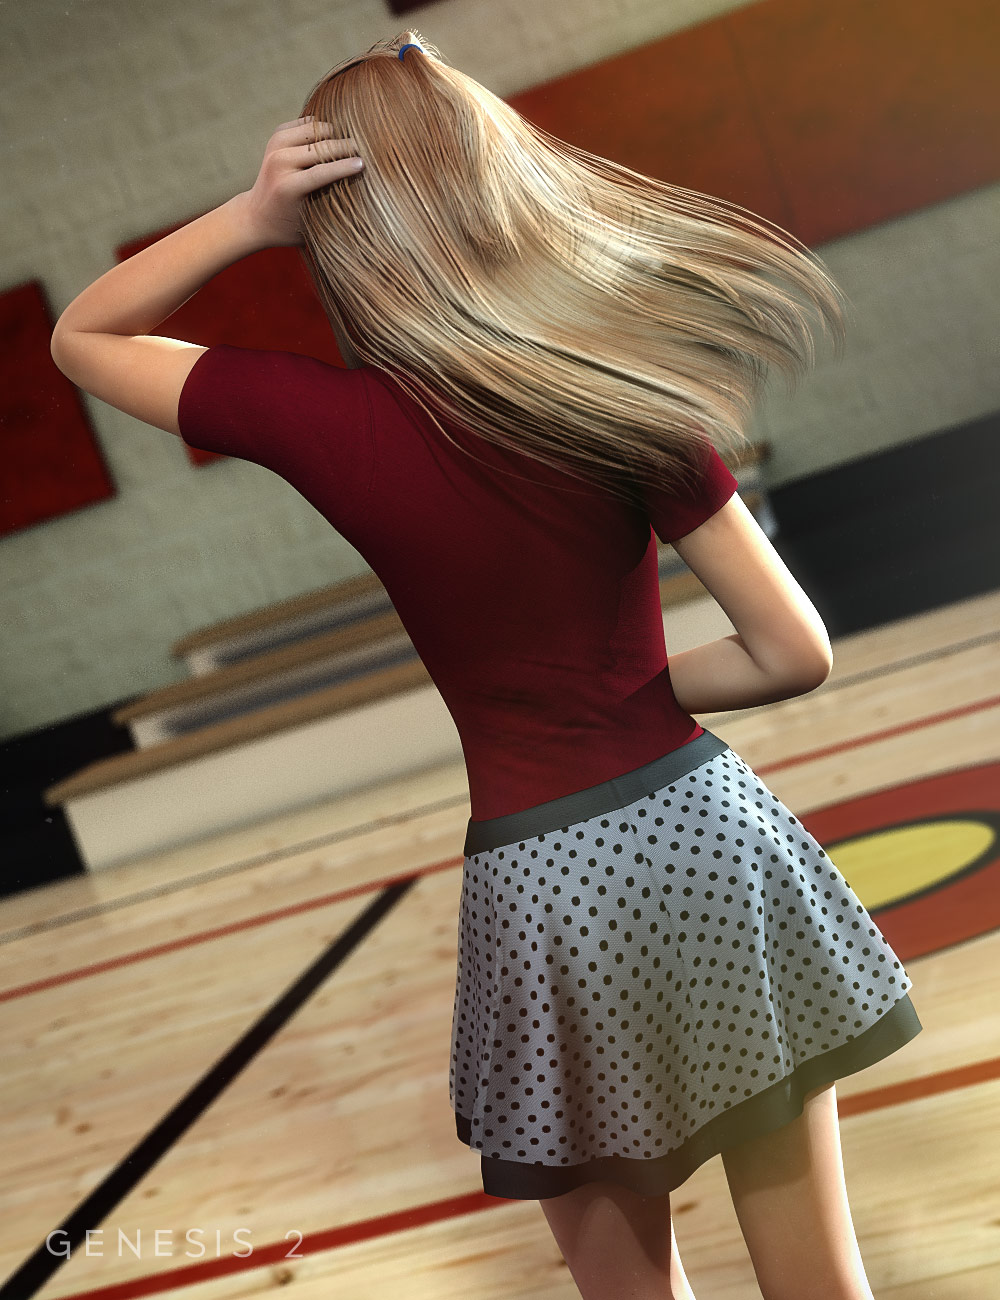 Ladybug Outfit for Genesis 2 Female(s) by: Ryverthorn, 3D Models by Daz 3D